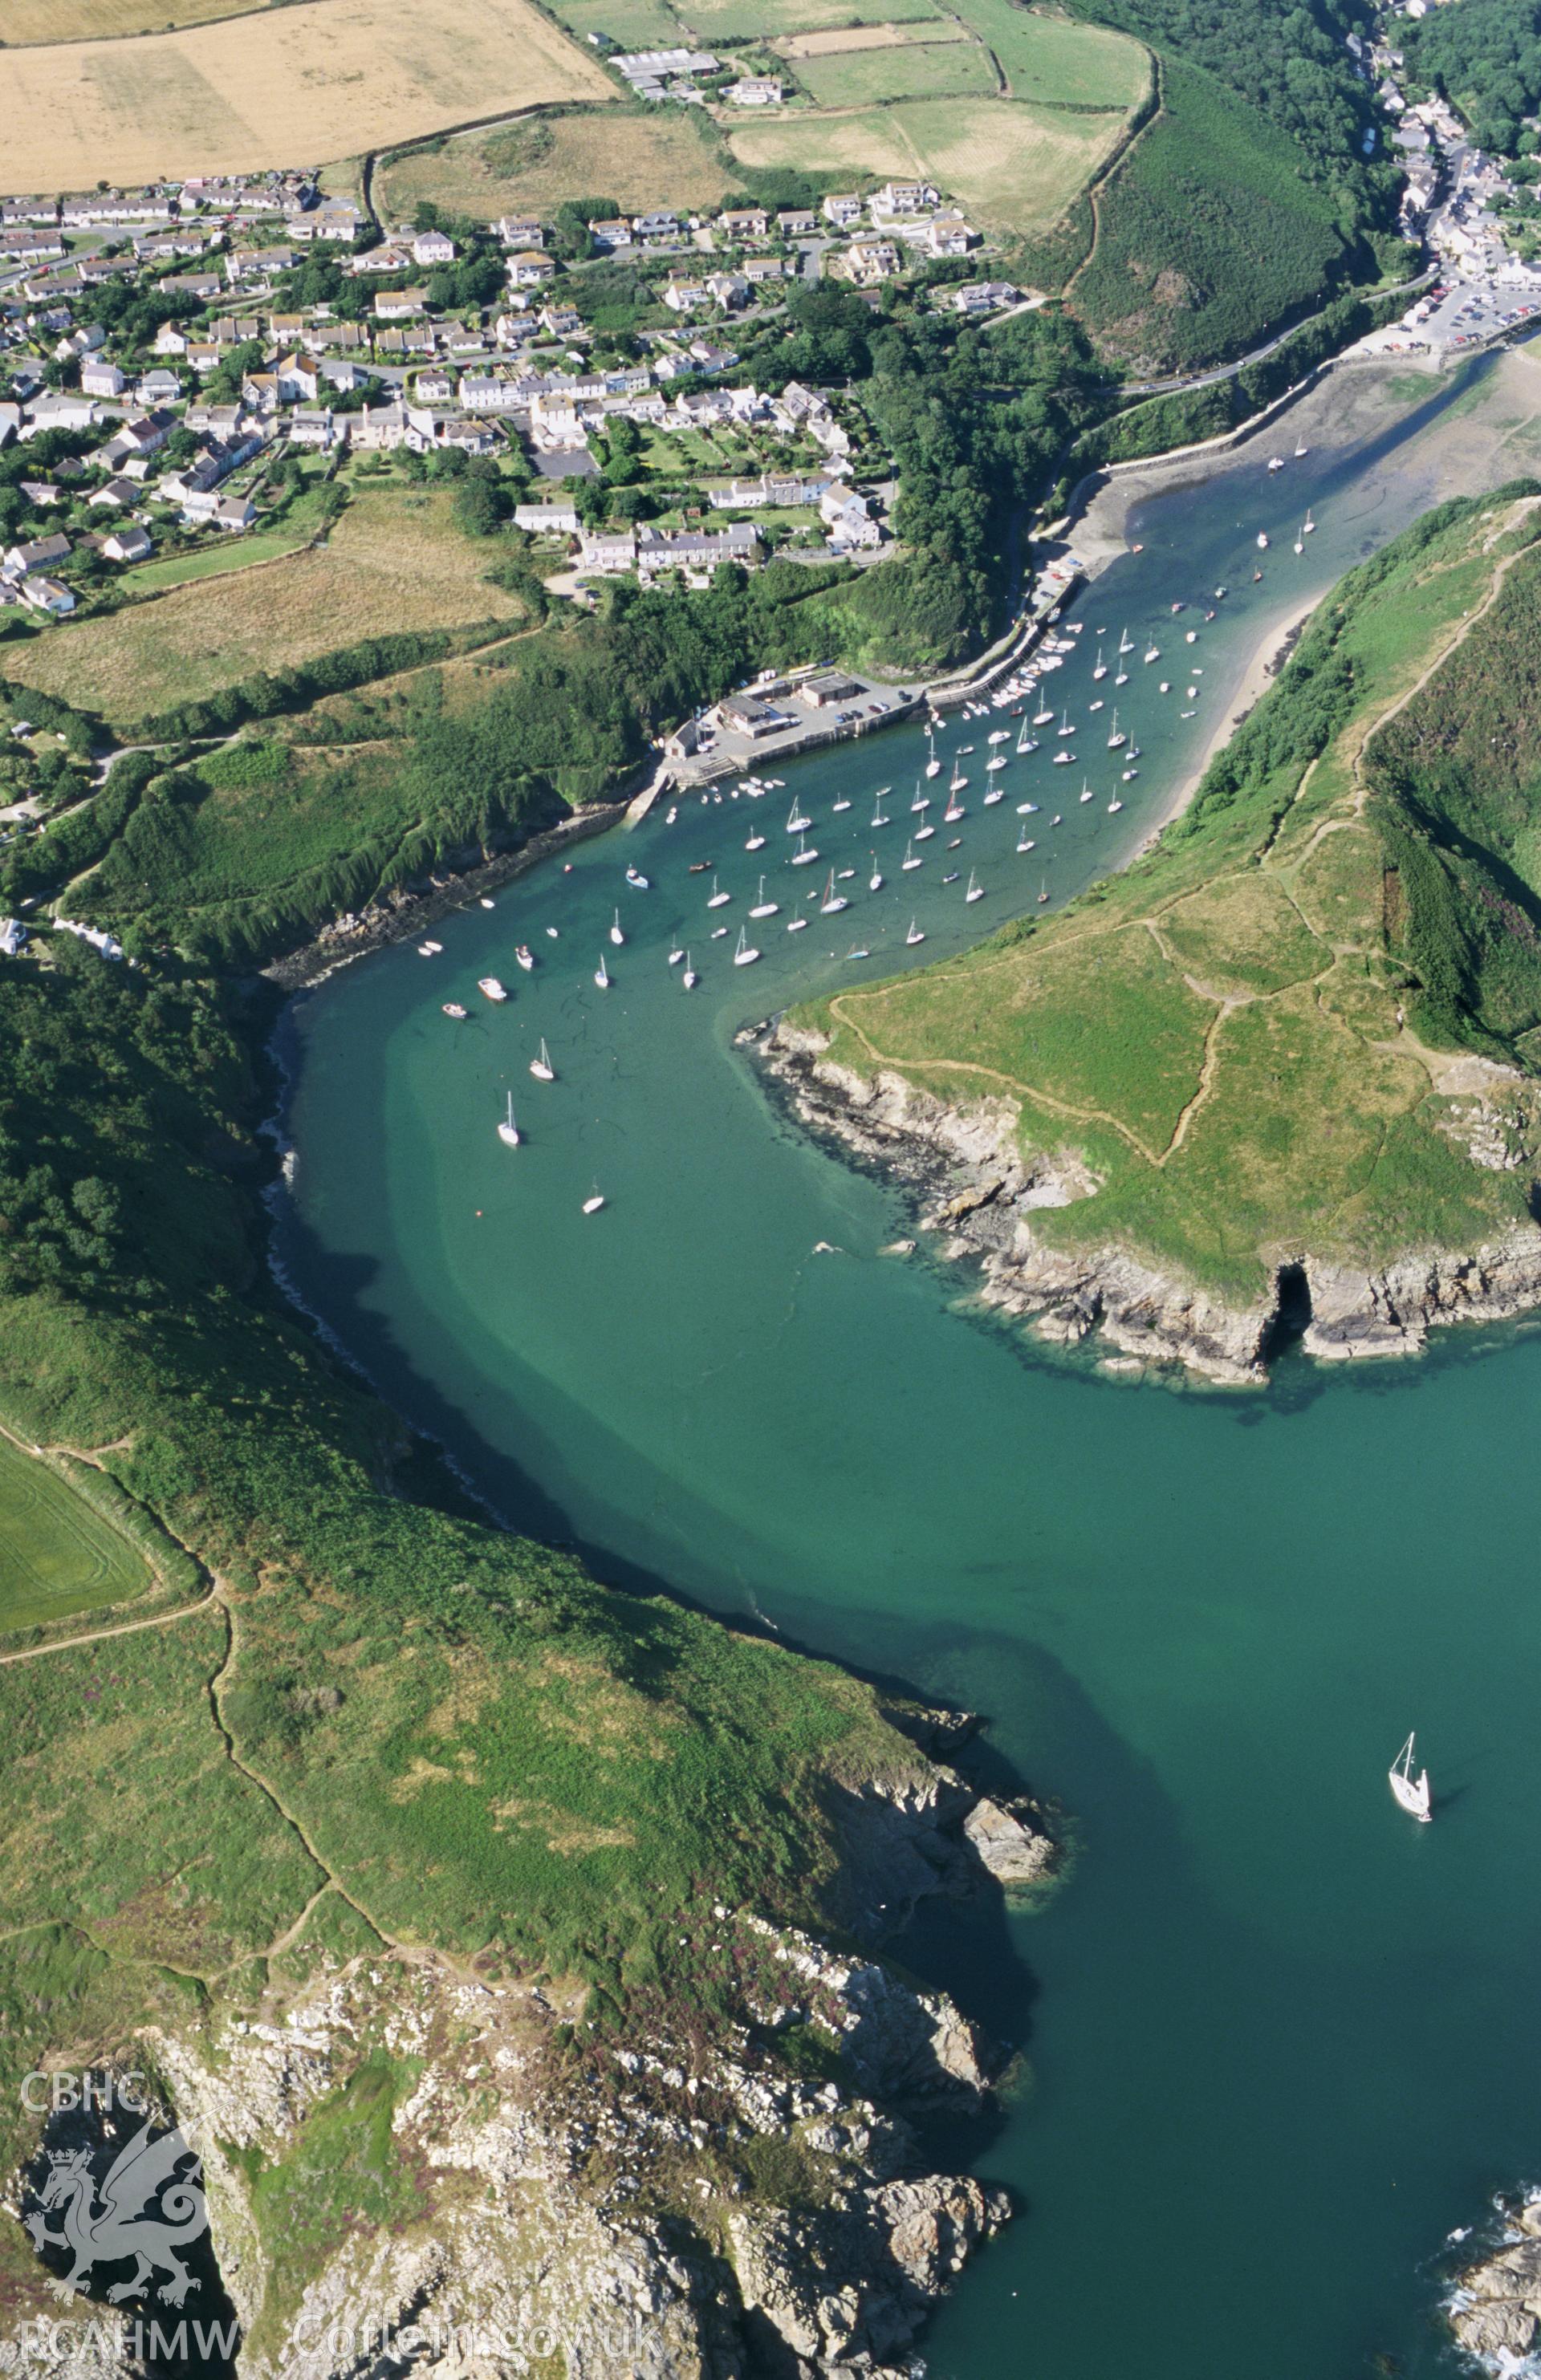 RCAHMW colour slide oblique aerial photograph of Solva, taken by T.G.Driver on the 17/07/2000